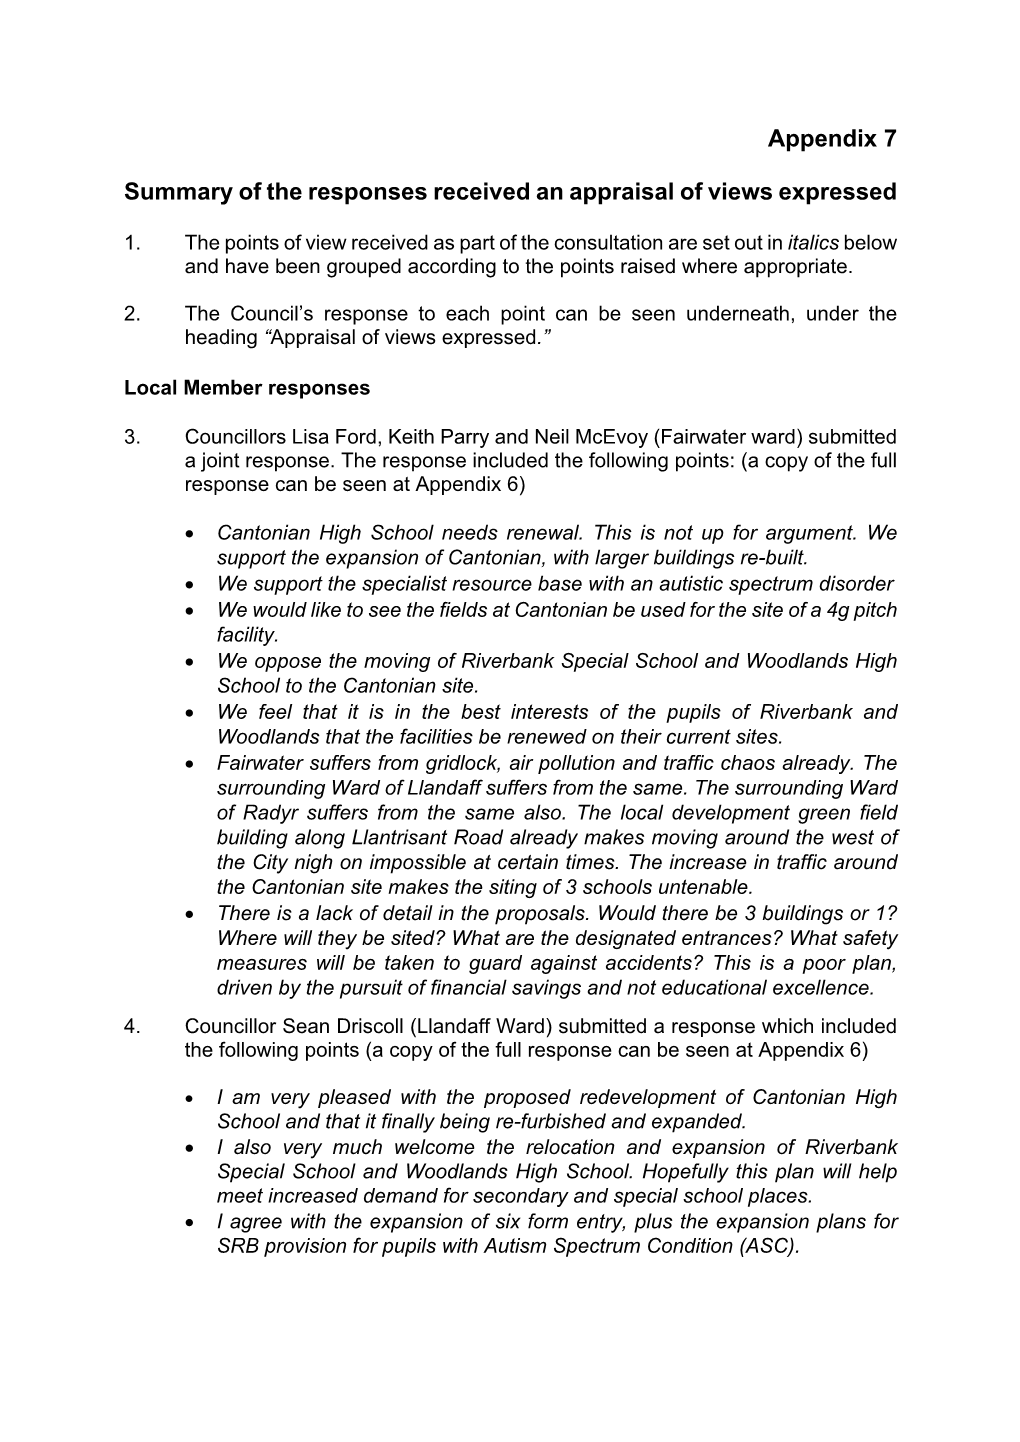 Appendix 7 Summary of the Responses Received an Appraisal Of